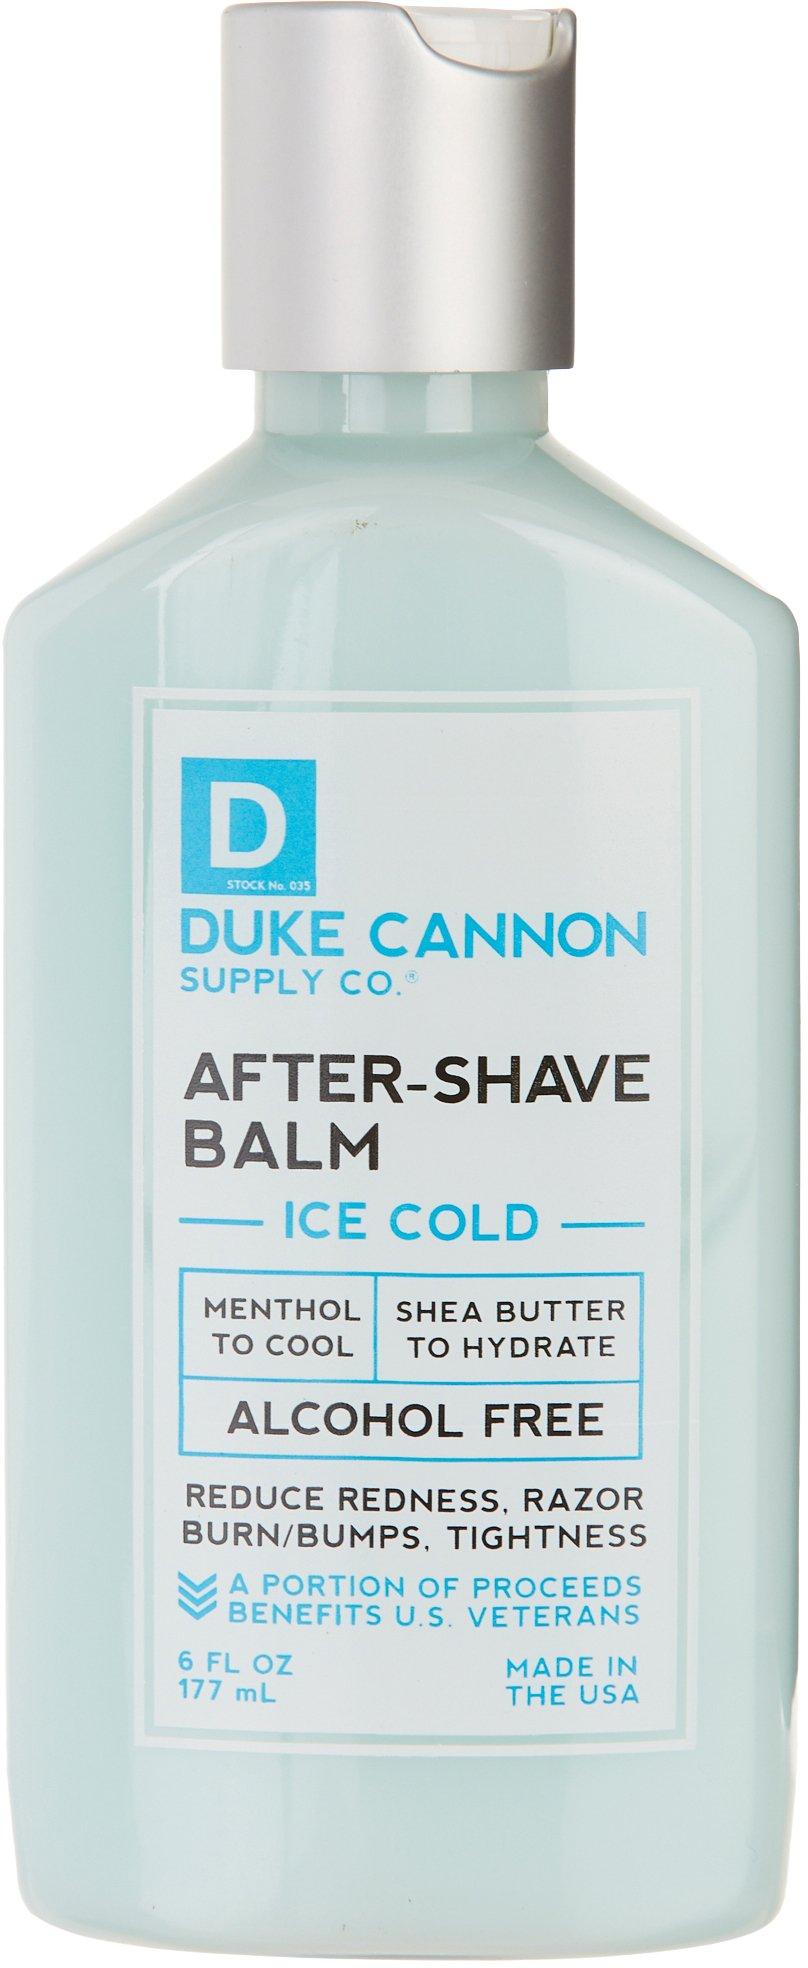 Duke Cannon 6 oz Ice Cold After-Shave Balm